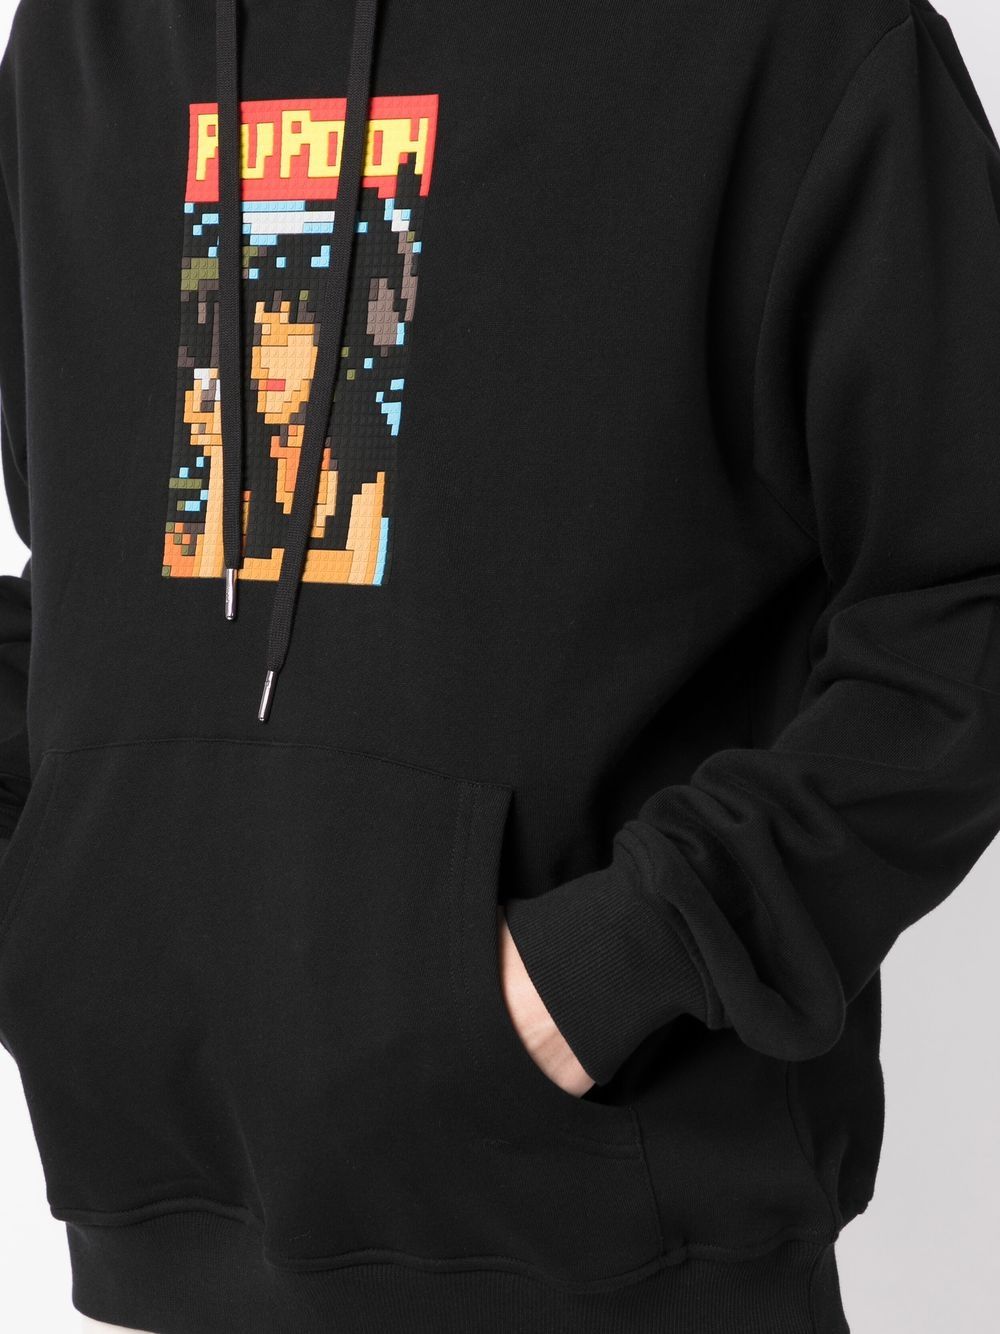 Shop Mostly Heard Rarely Seen 8-bit Pulp Fiction Long-sleeve Hoodie In Black